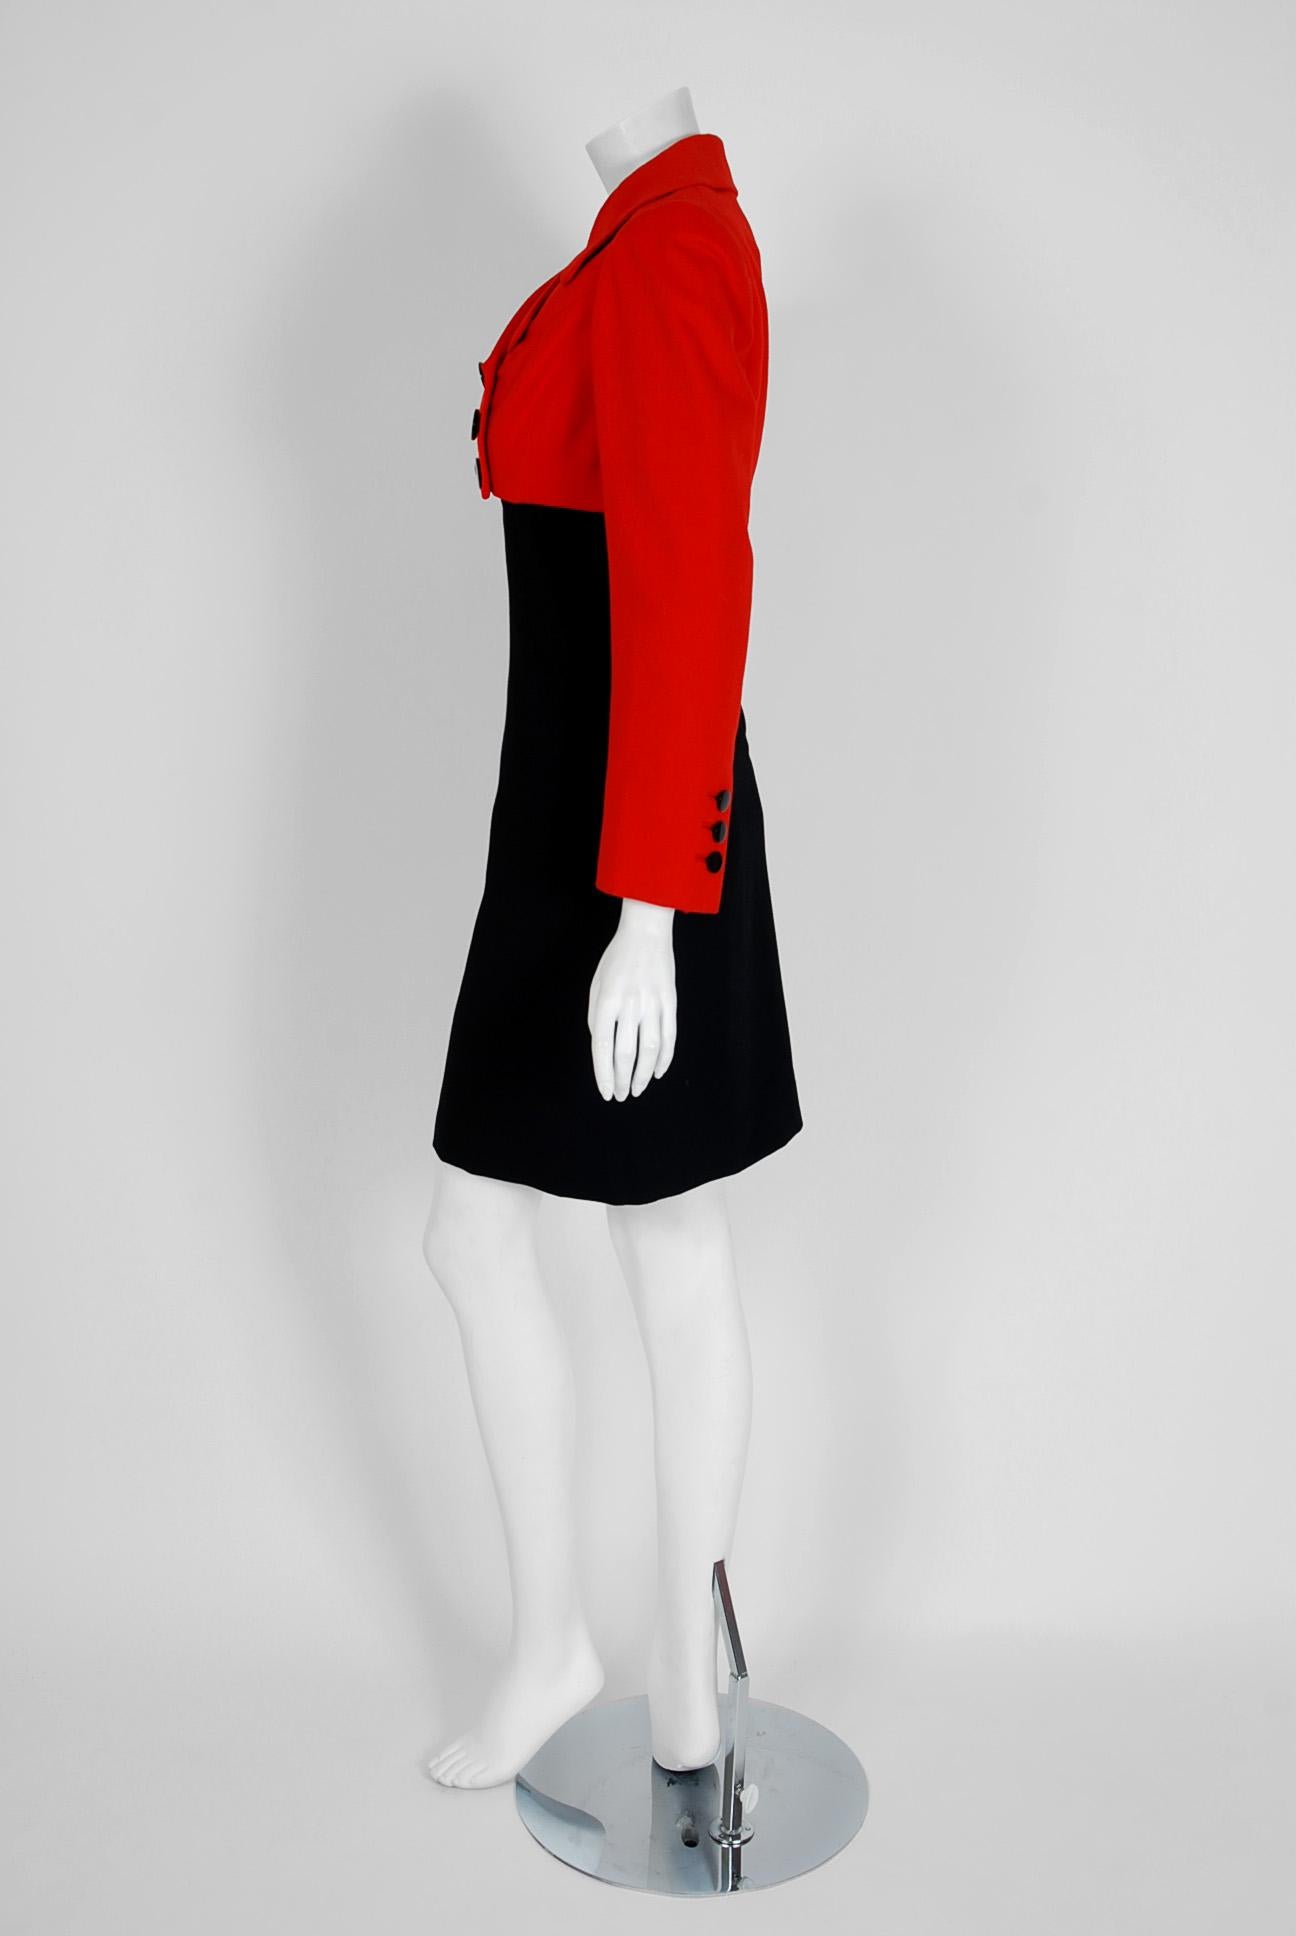 Women's 1957 Traina-Norell Red Black Wool Cropped Double-Breasted Jacket & Dress Suit